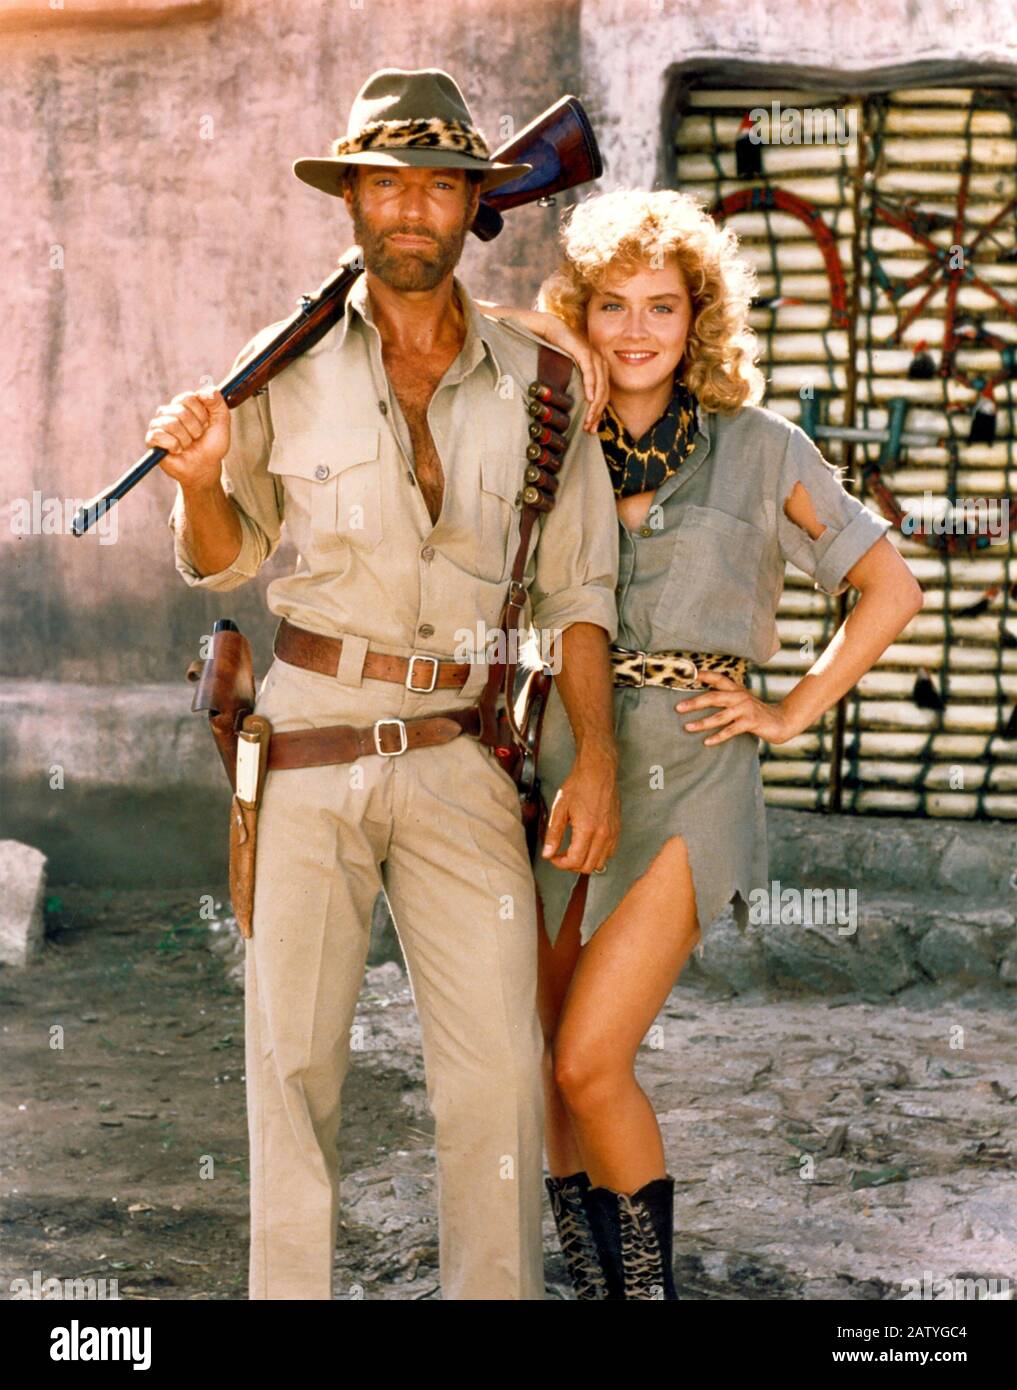 KING SOLOMON'S MINES 1985 Cannon Group film with Sharon Stone and Richard  Chamberlain Stock Photo - Alamy